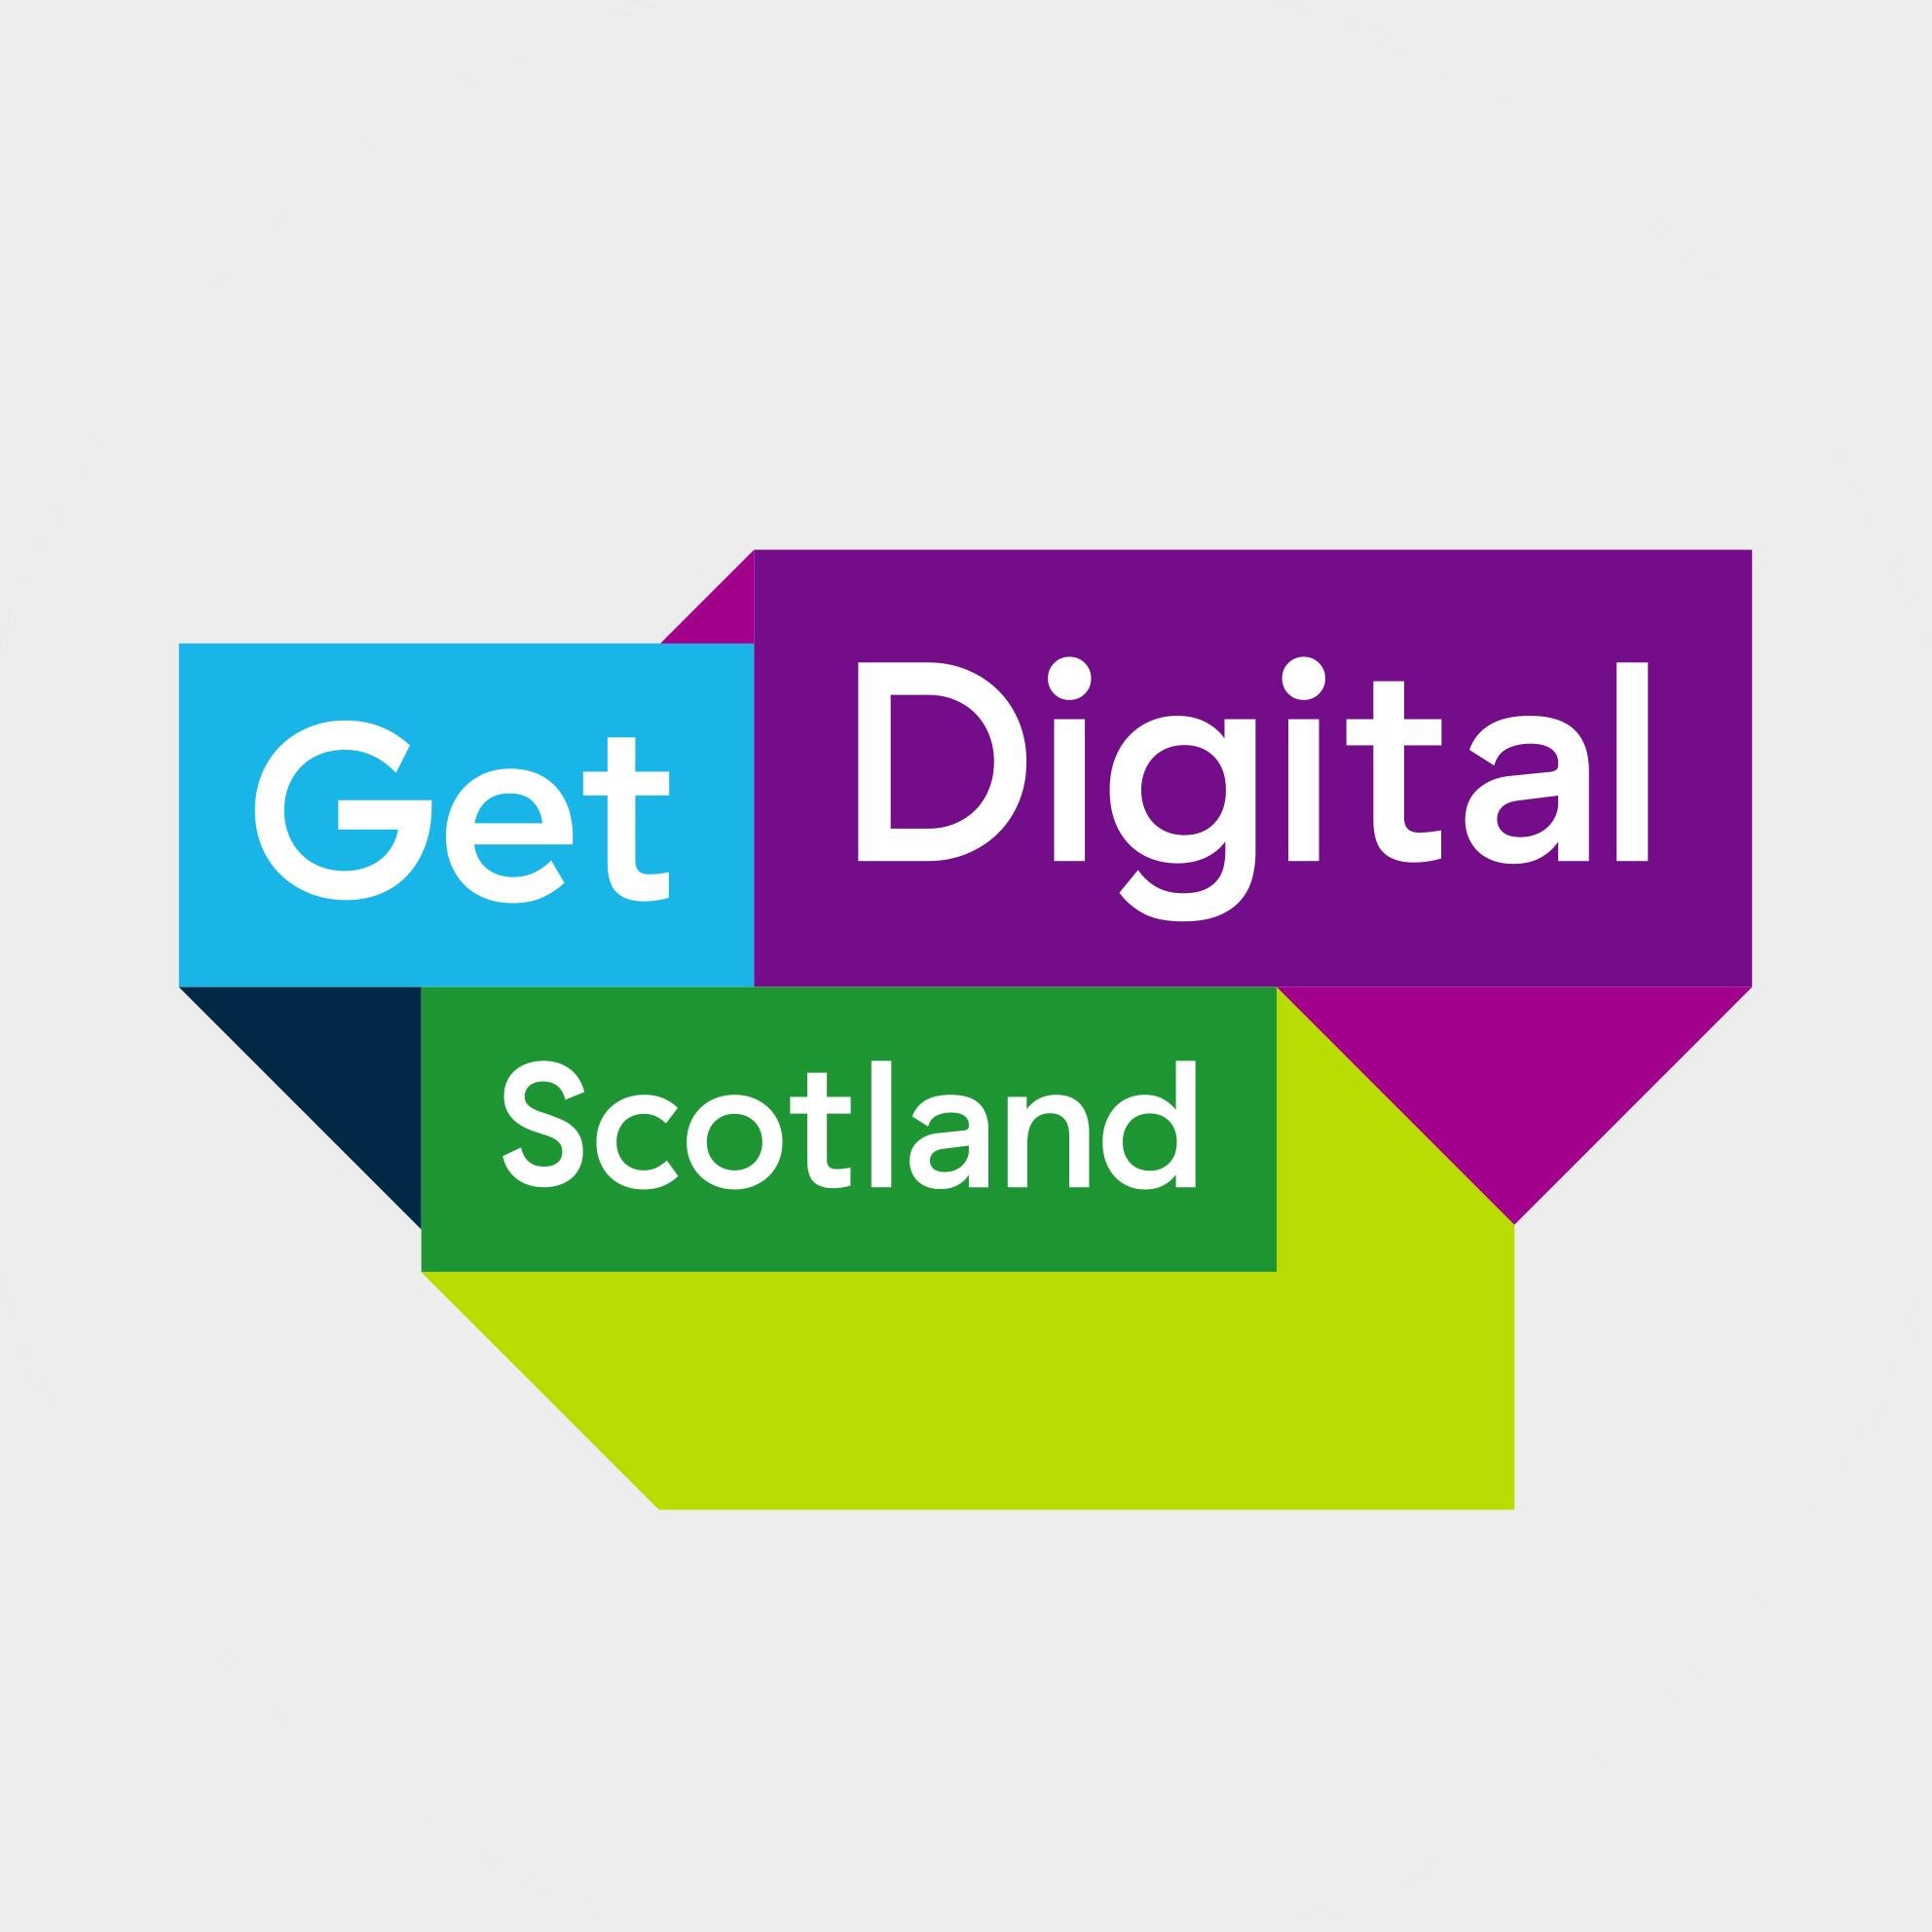 Building digital skills to end homelessness. Project of @SimonCommScot